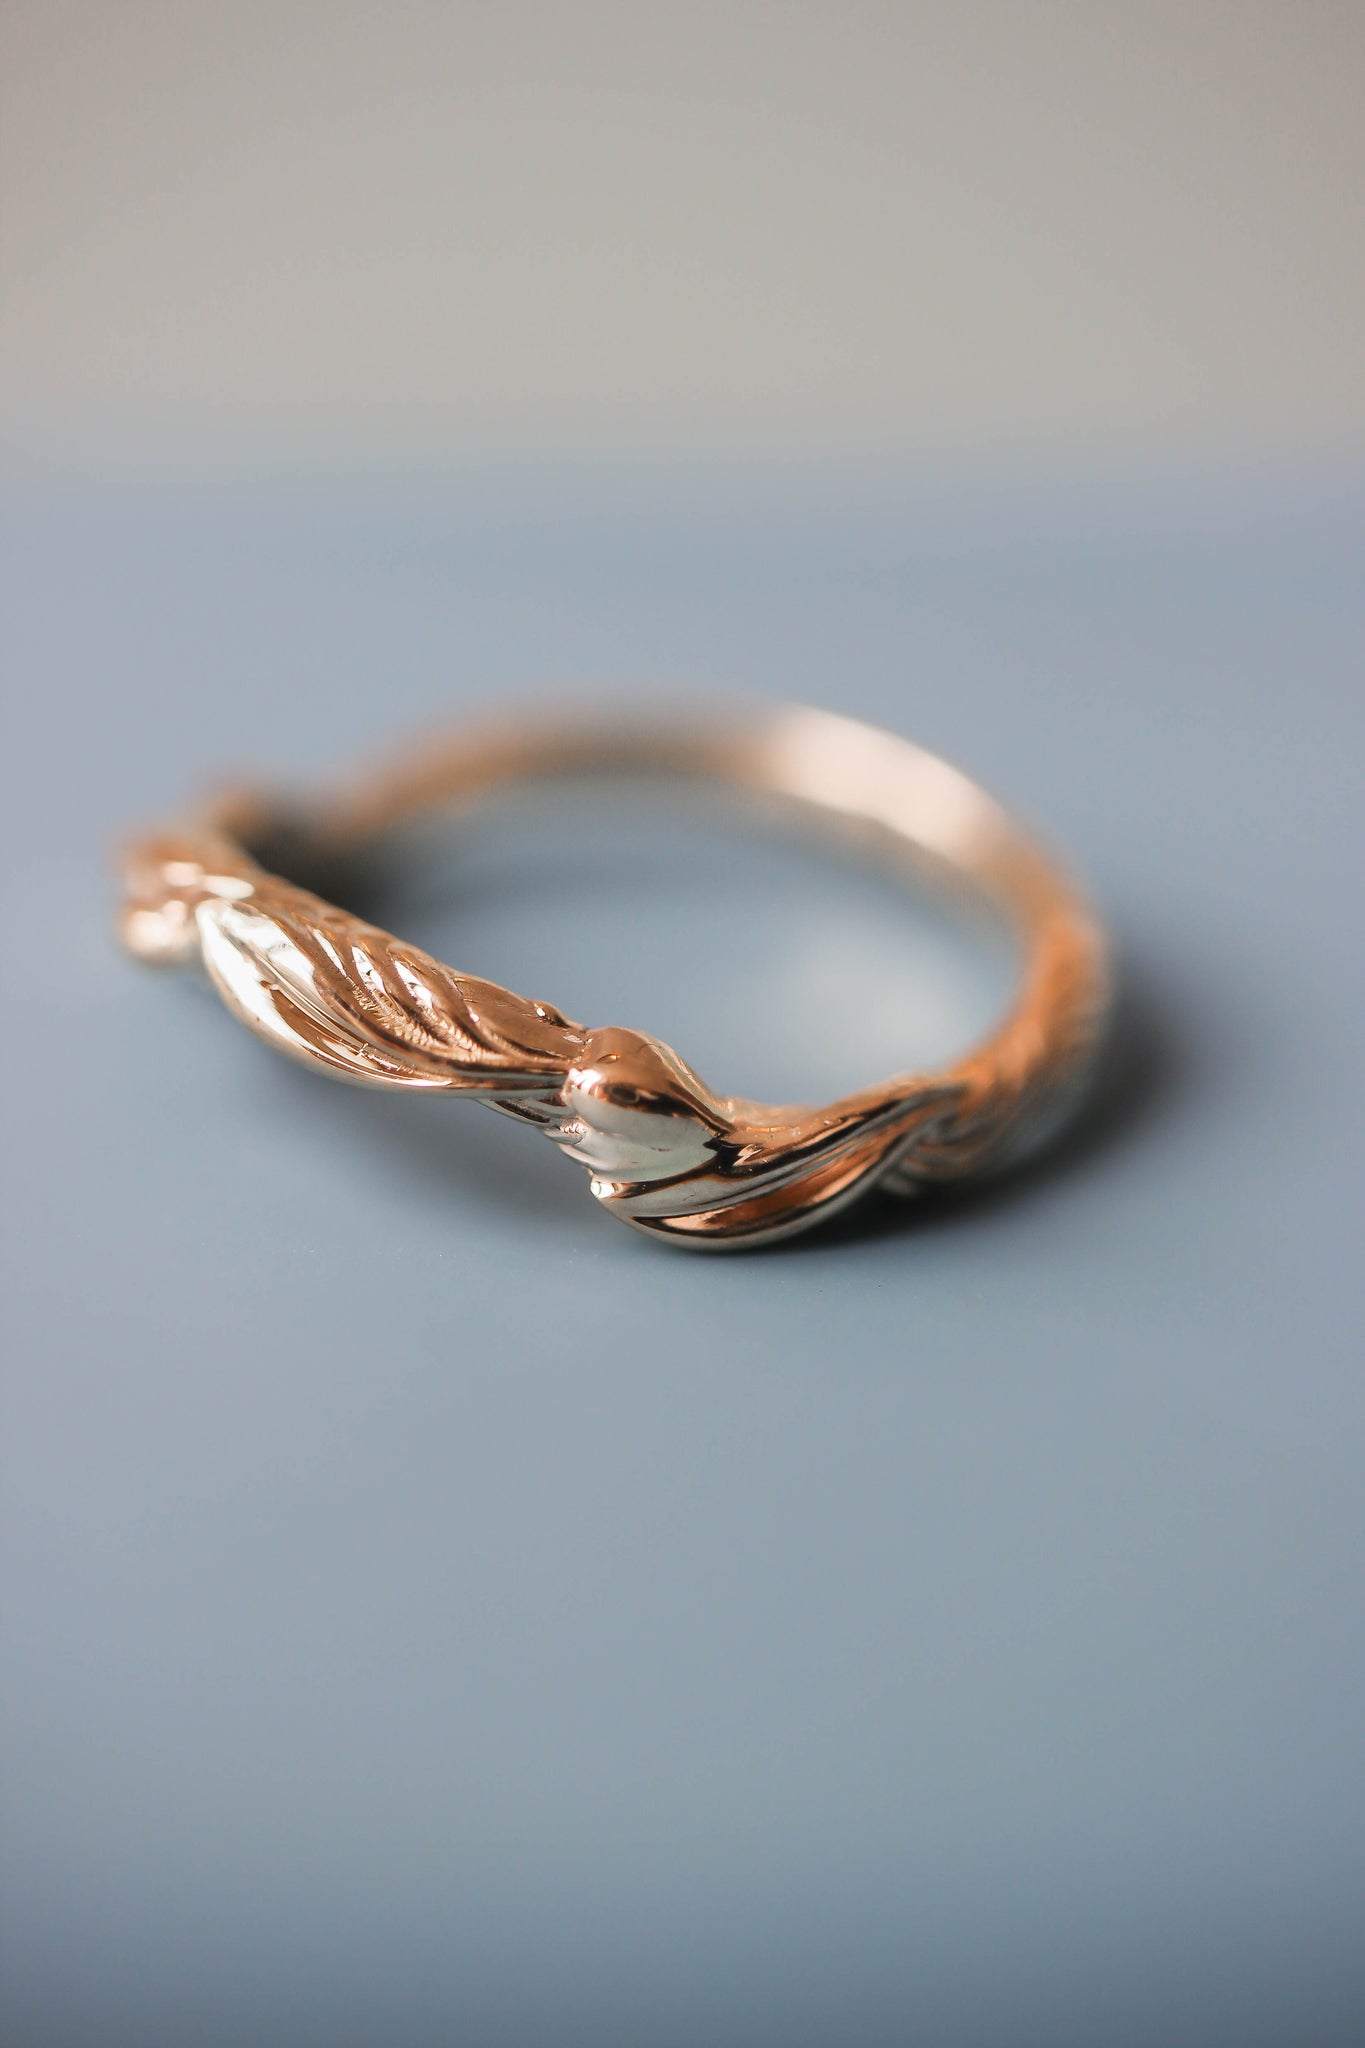 Twisted branch wedding ring, matching band for Olivia - Eden Garden Jewelry™